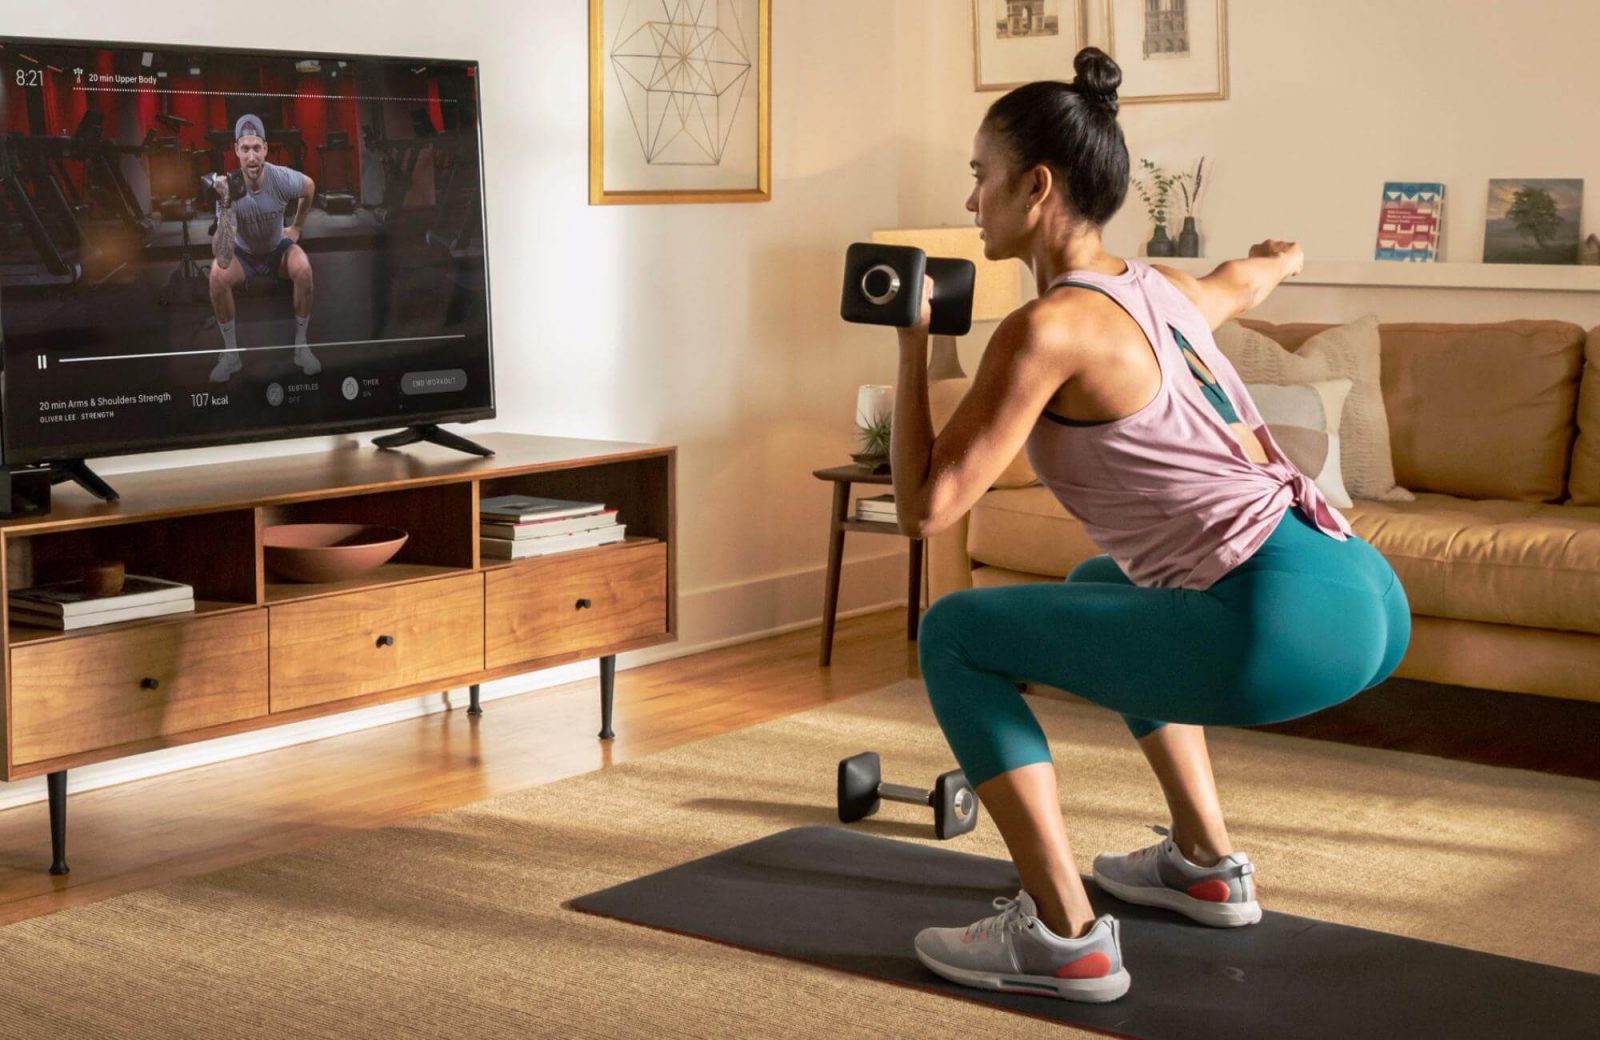 How to Use Peloton App on Apple TV Working - TechOwns